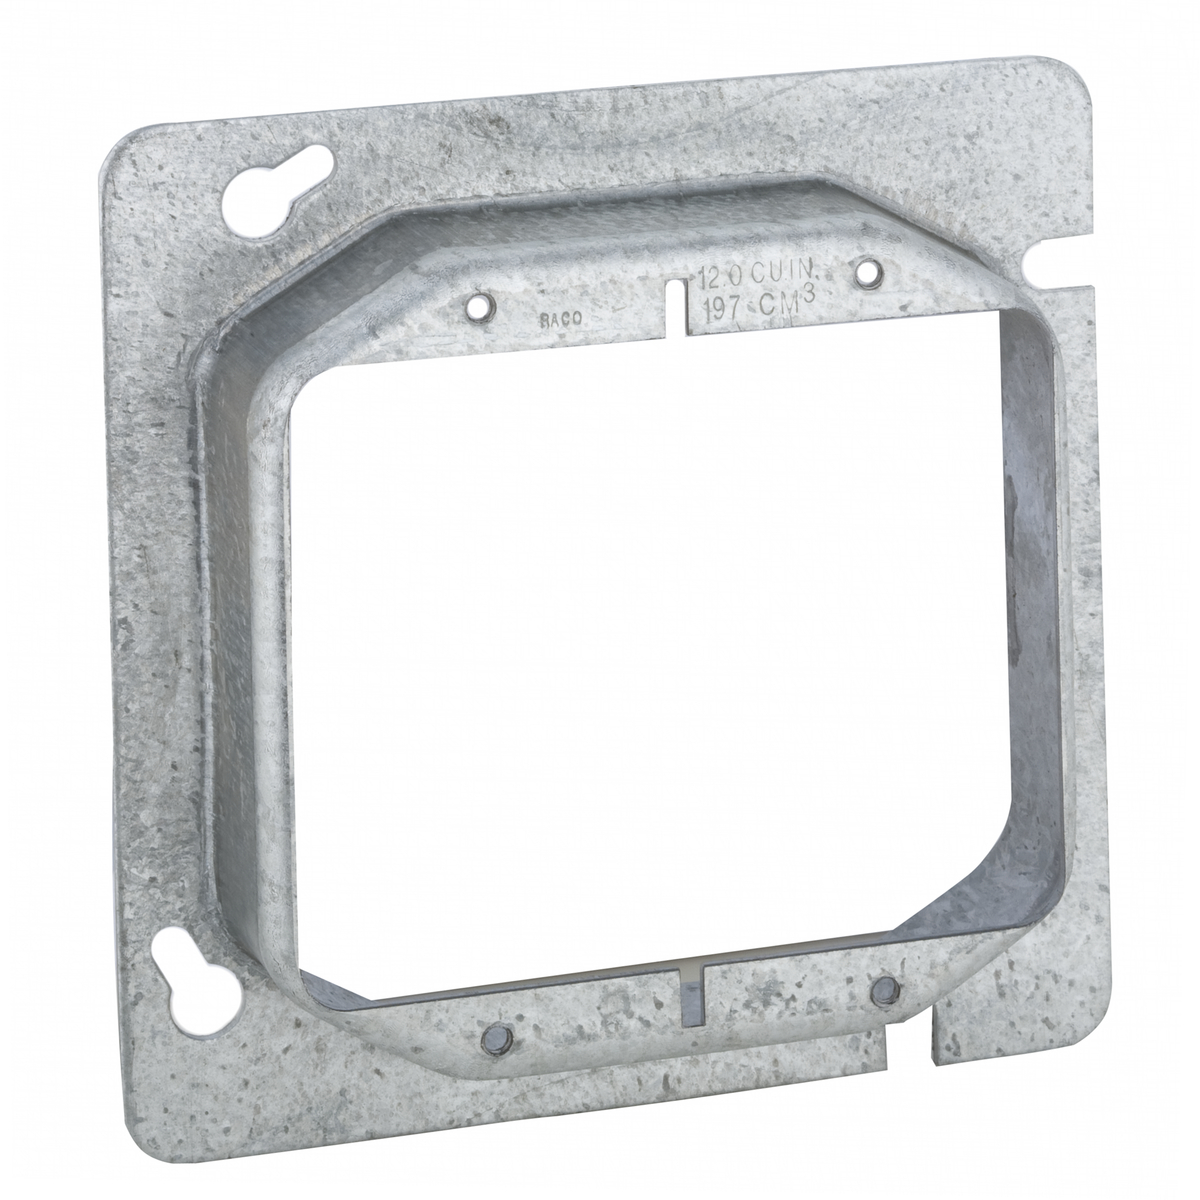 RACO 819 4-11/16" SQUARE MUD-RING, TWO DEVICE, RAISED 1"